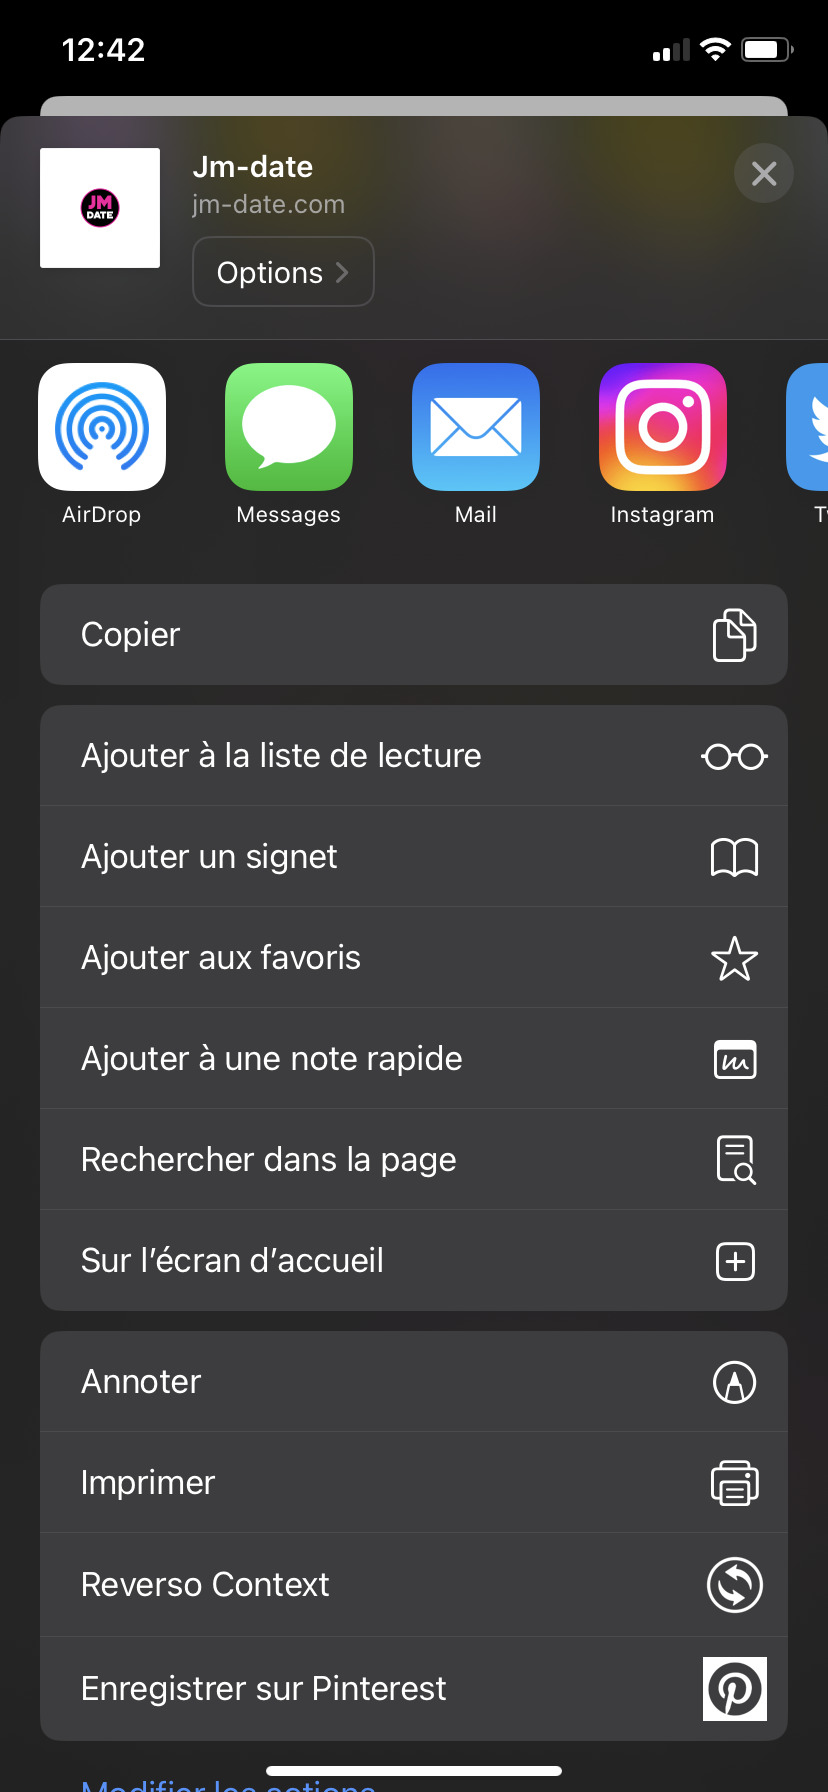 Jacquie et Michel contact : on the IOS home screen